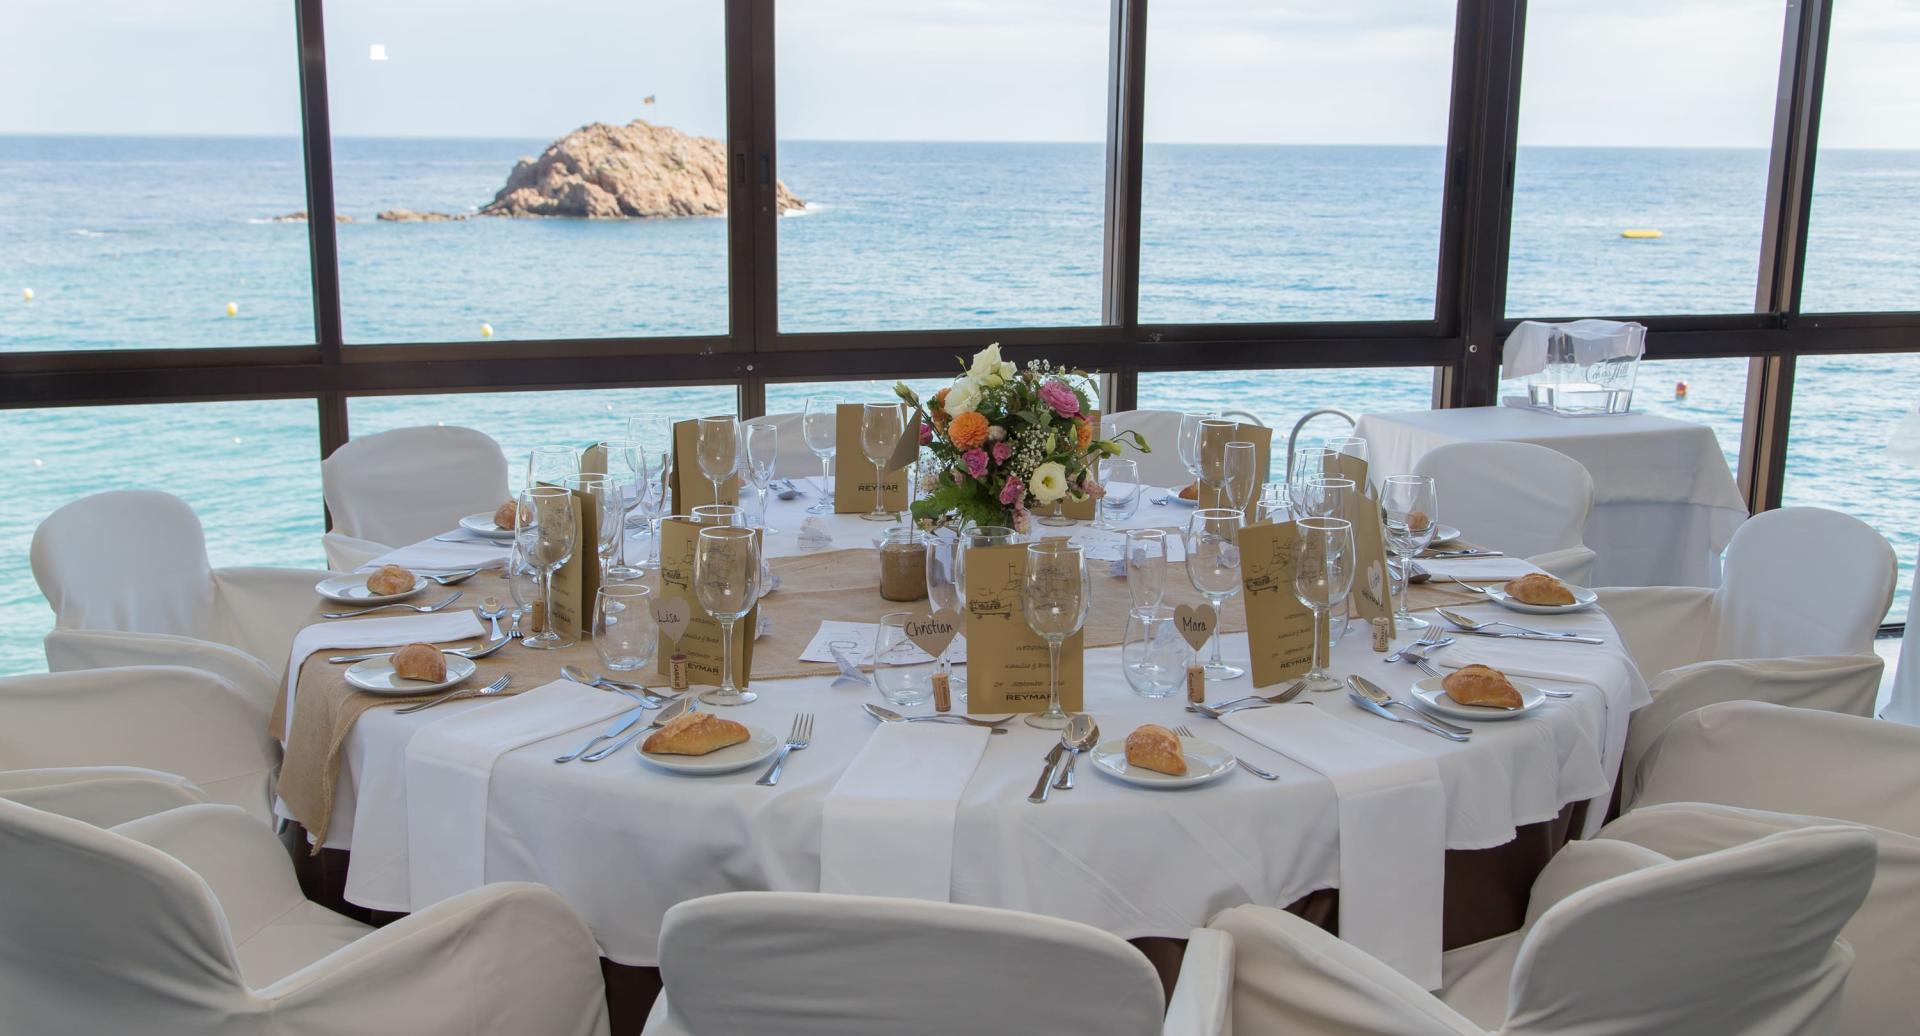 Celebrate your event with sea views